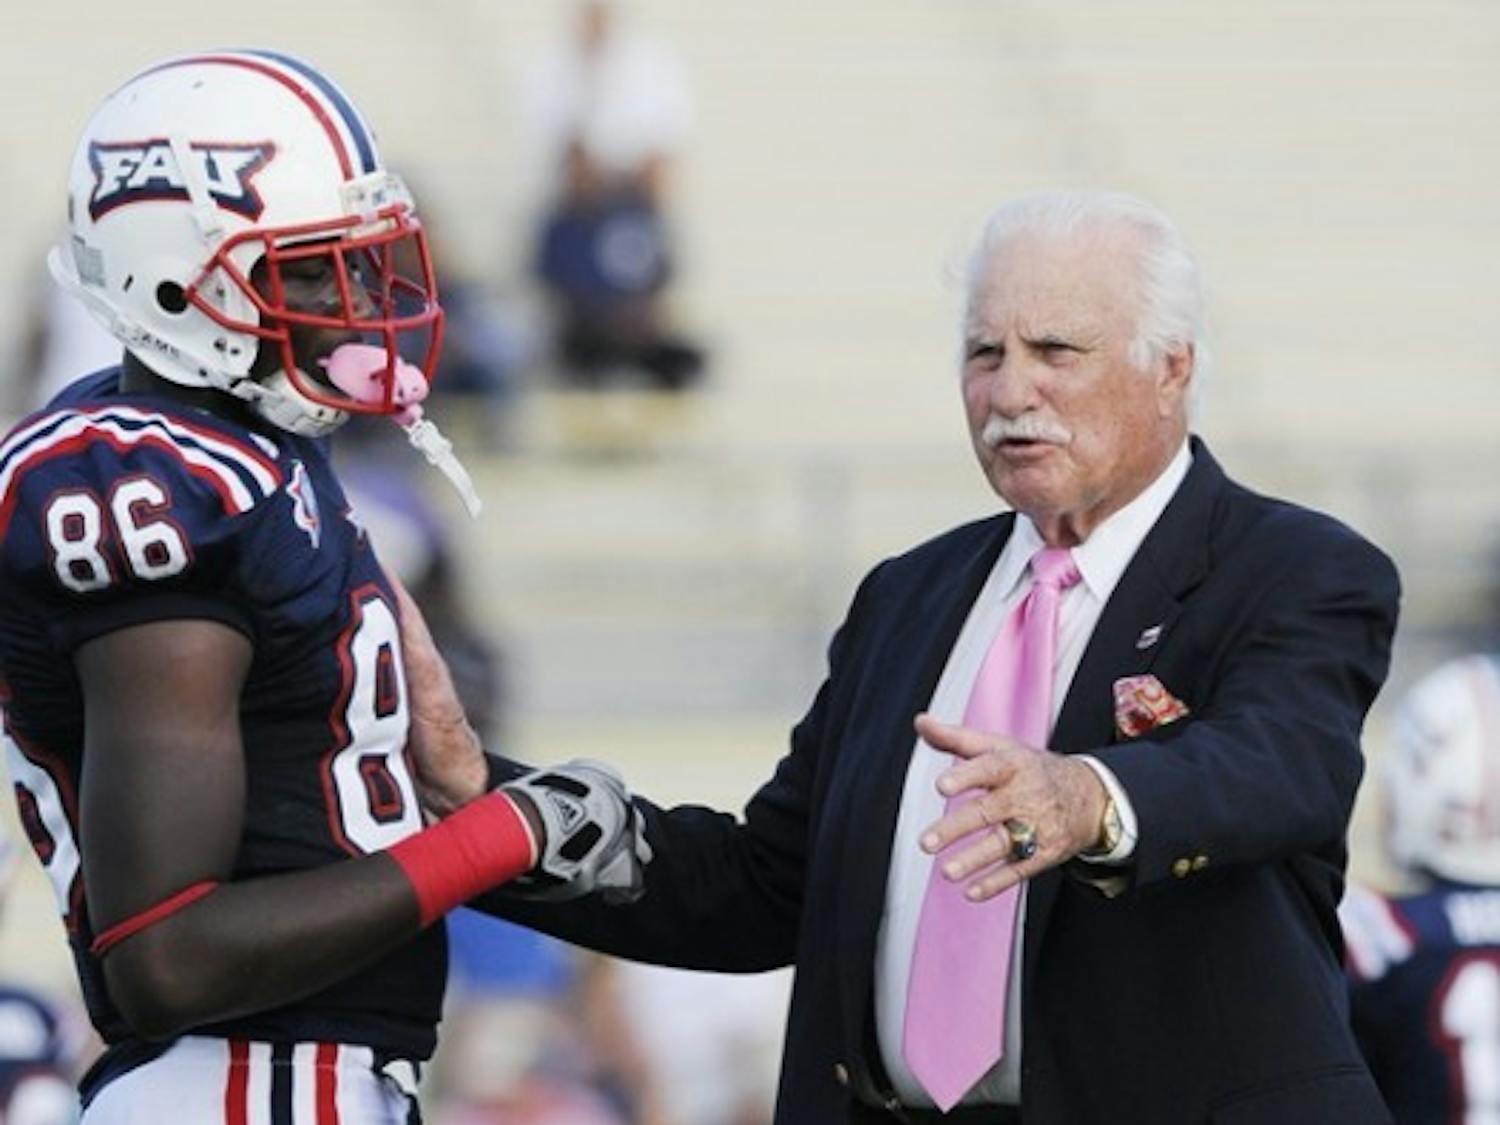 Florida Atlantic coach Howard Schnellenberger, who will retire at the end of the 2011 season, said Florida “certainly” should win Saturday’s game.